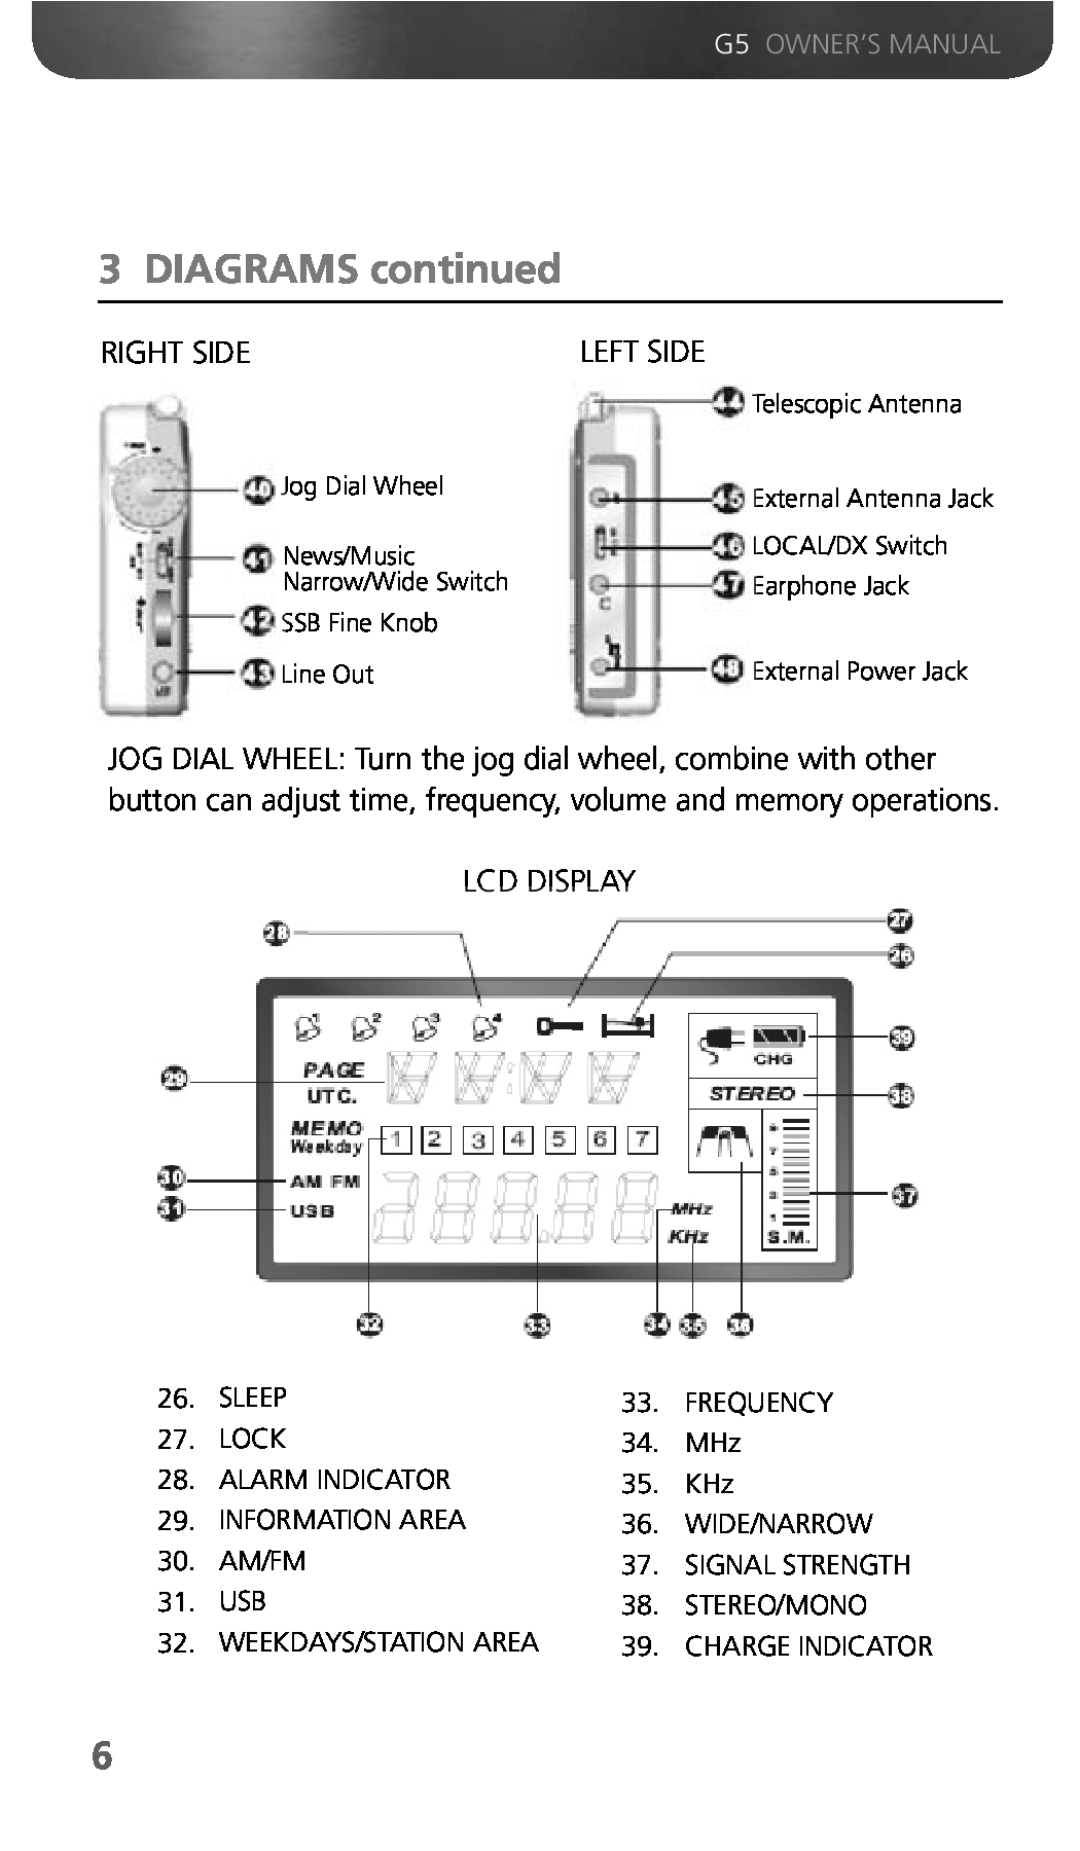 Eton G5 owner manual DIAGRAMS continued, Right Side, Left Side, Lcd Display 